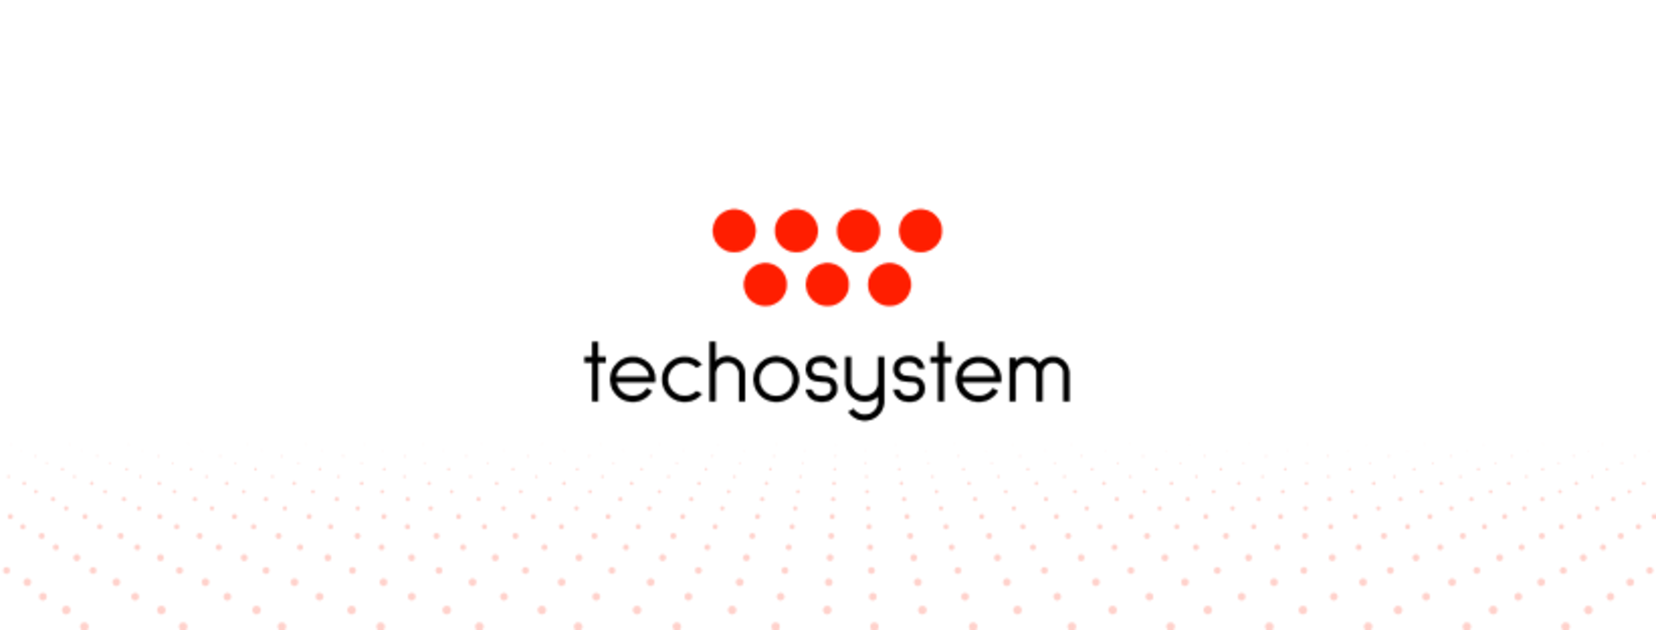 TECHIIA Holding becomes a partner of Techosystem